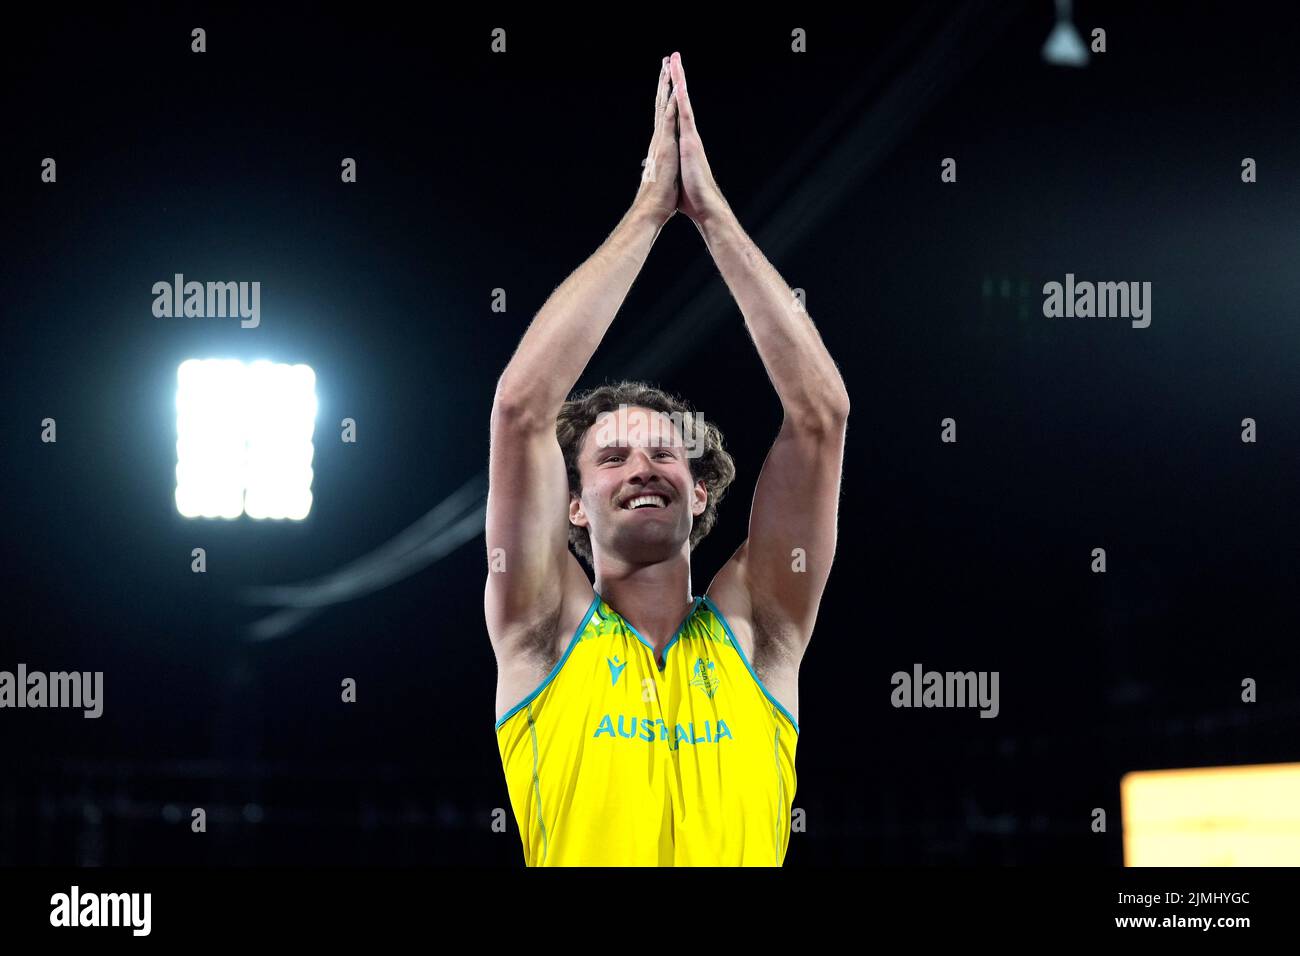 Australia's Kurtis Marschall celebrates winning gold in the Men's Pole Vault Final at Alexander Stadium on day nine of the 2022 Commonwealth Games in Birmingham. Picture date: Saturday August 6, 2022. Stock Photo